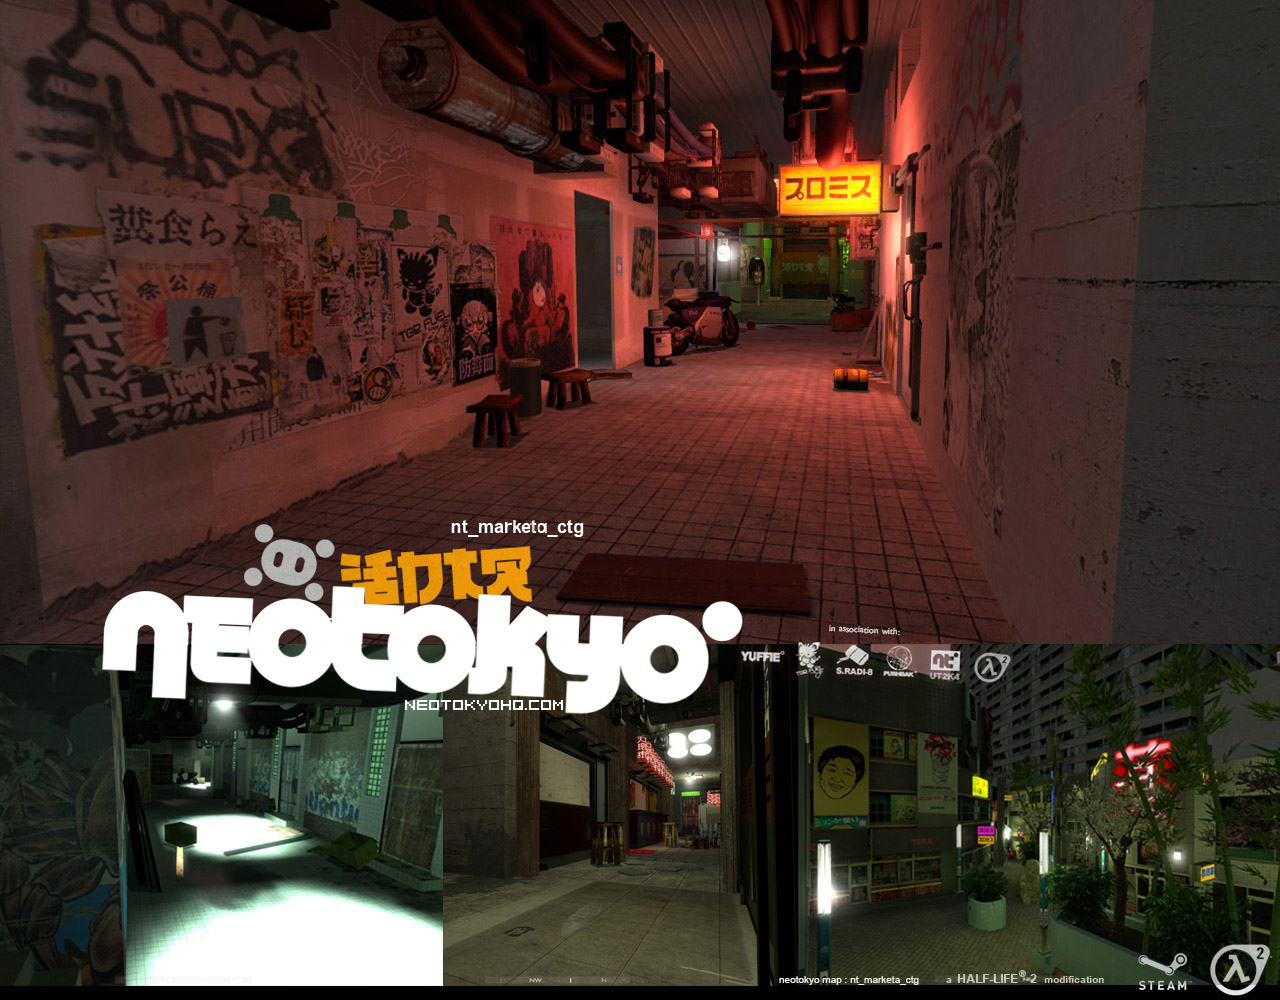 Cyberpunk Half-Life 2 mod, NeoTokyo, now available on Steam for free